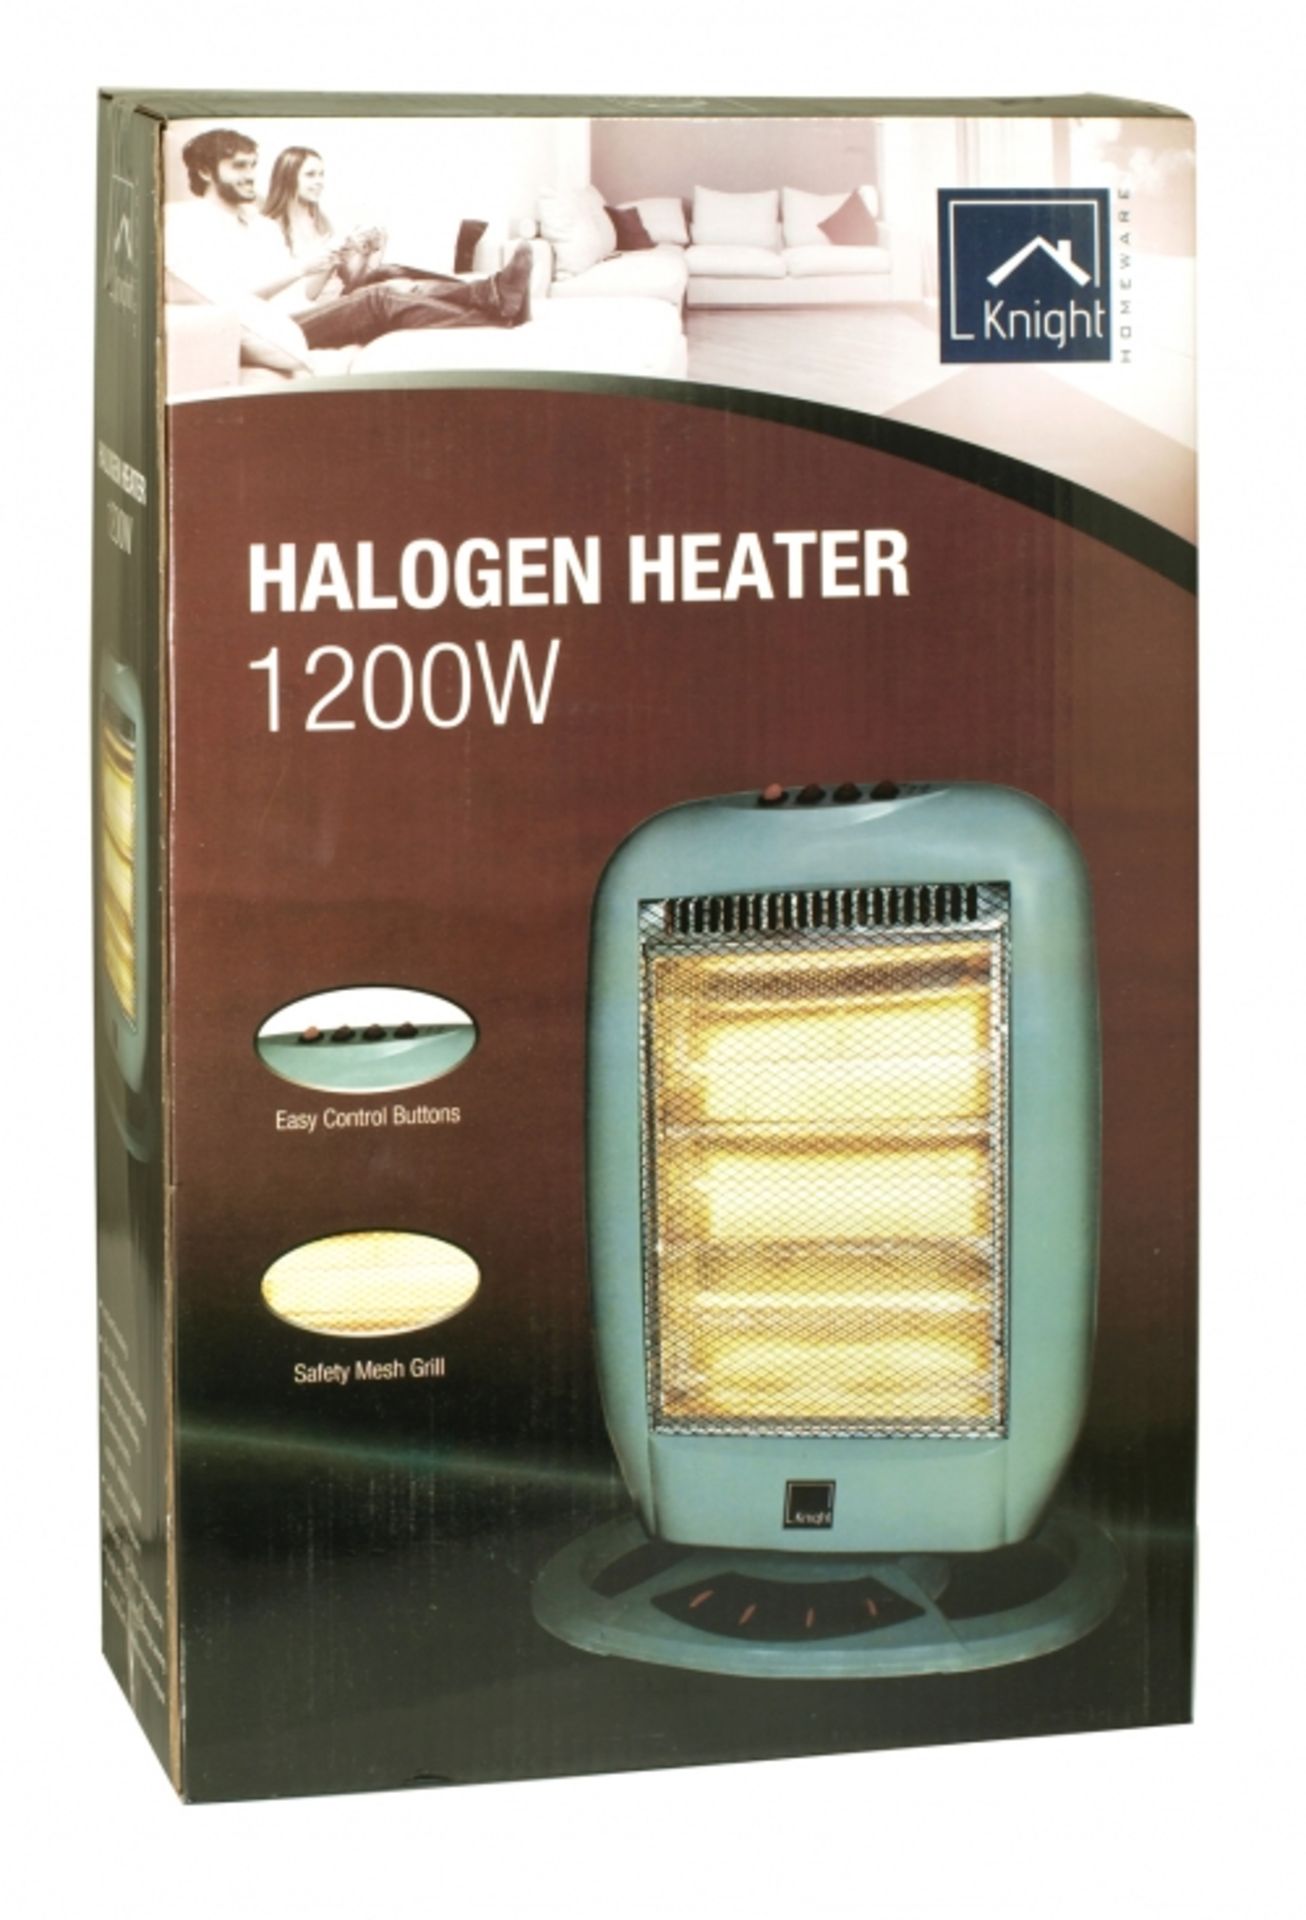 V *TRADE QTY* Brand New 1200W Halogen Heater With Oscillating Feature - Easy Control Buttons and